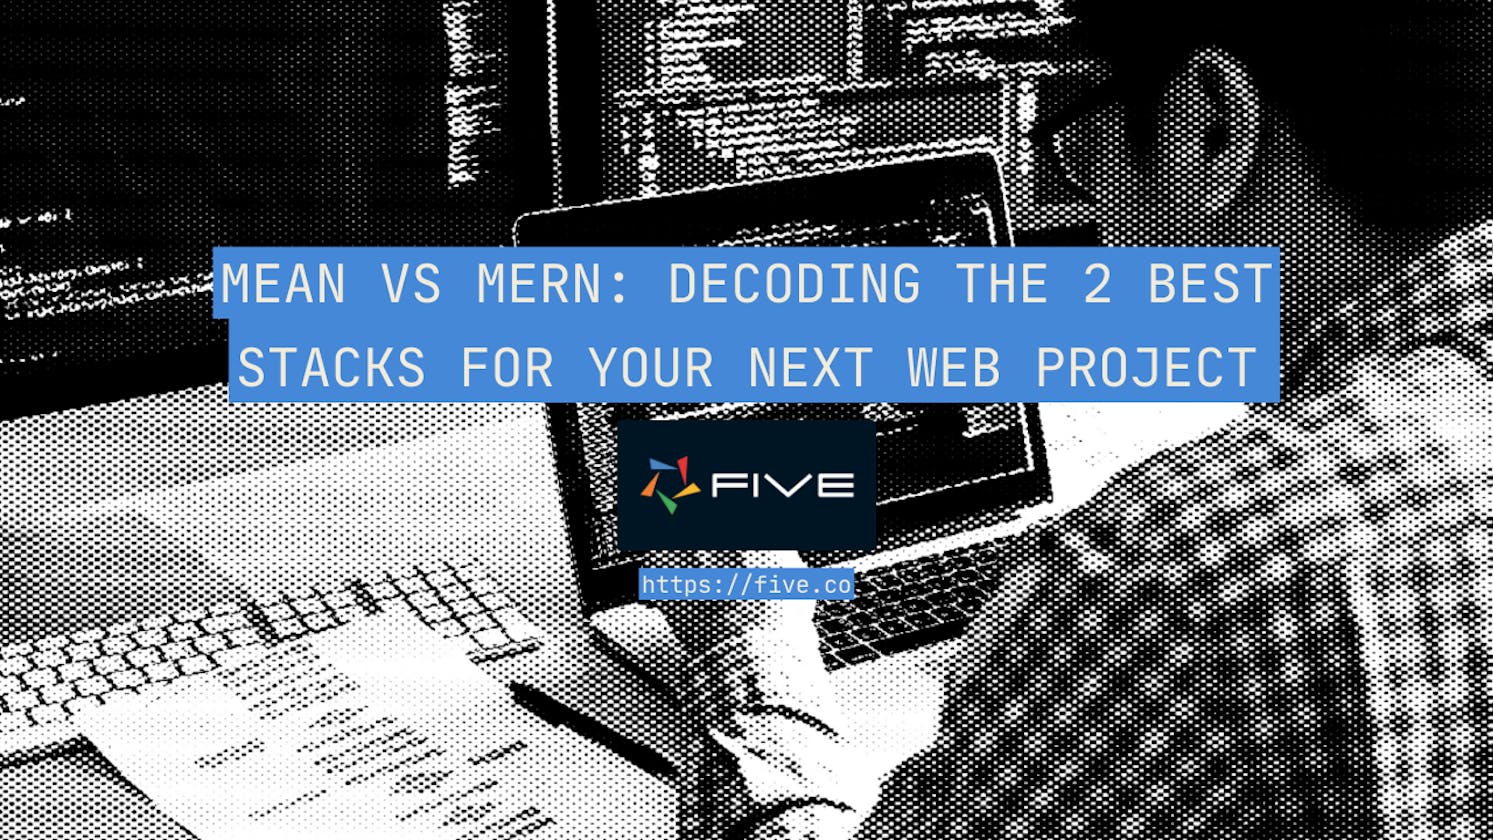 MEAN vs MERN: Decoding the 2 Best Stacks For Your Next Web Project